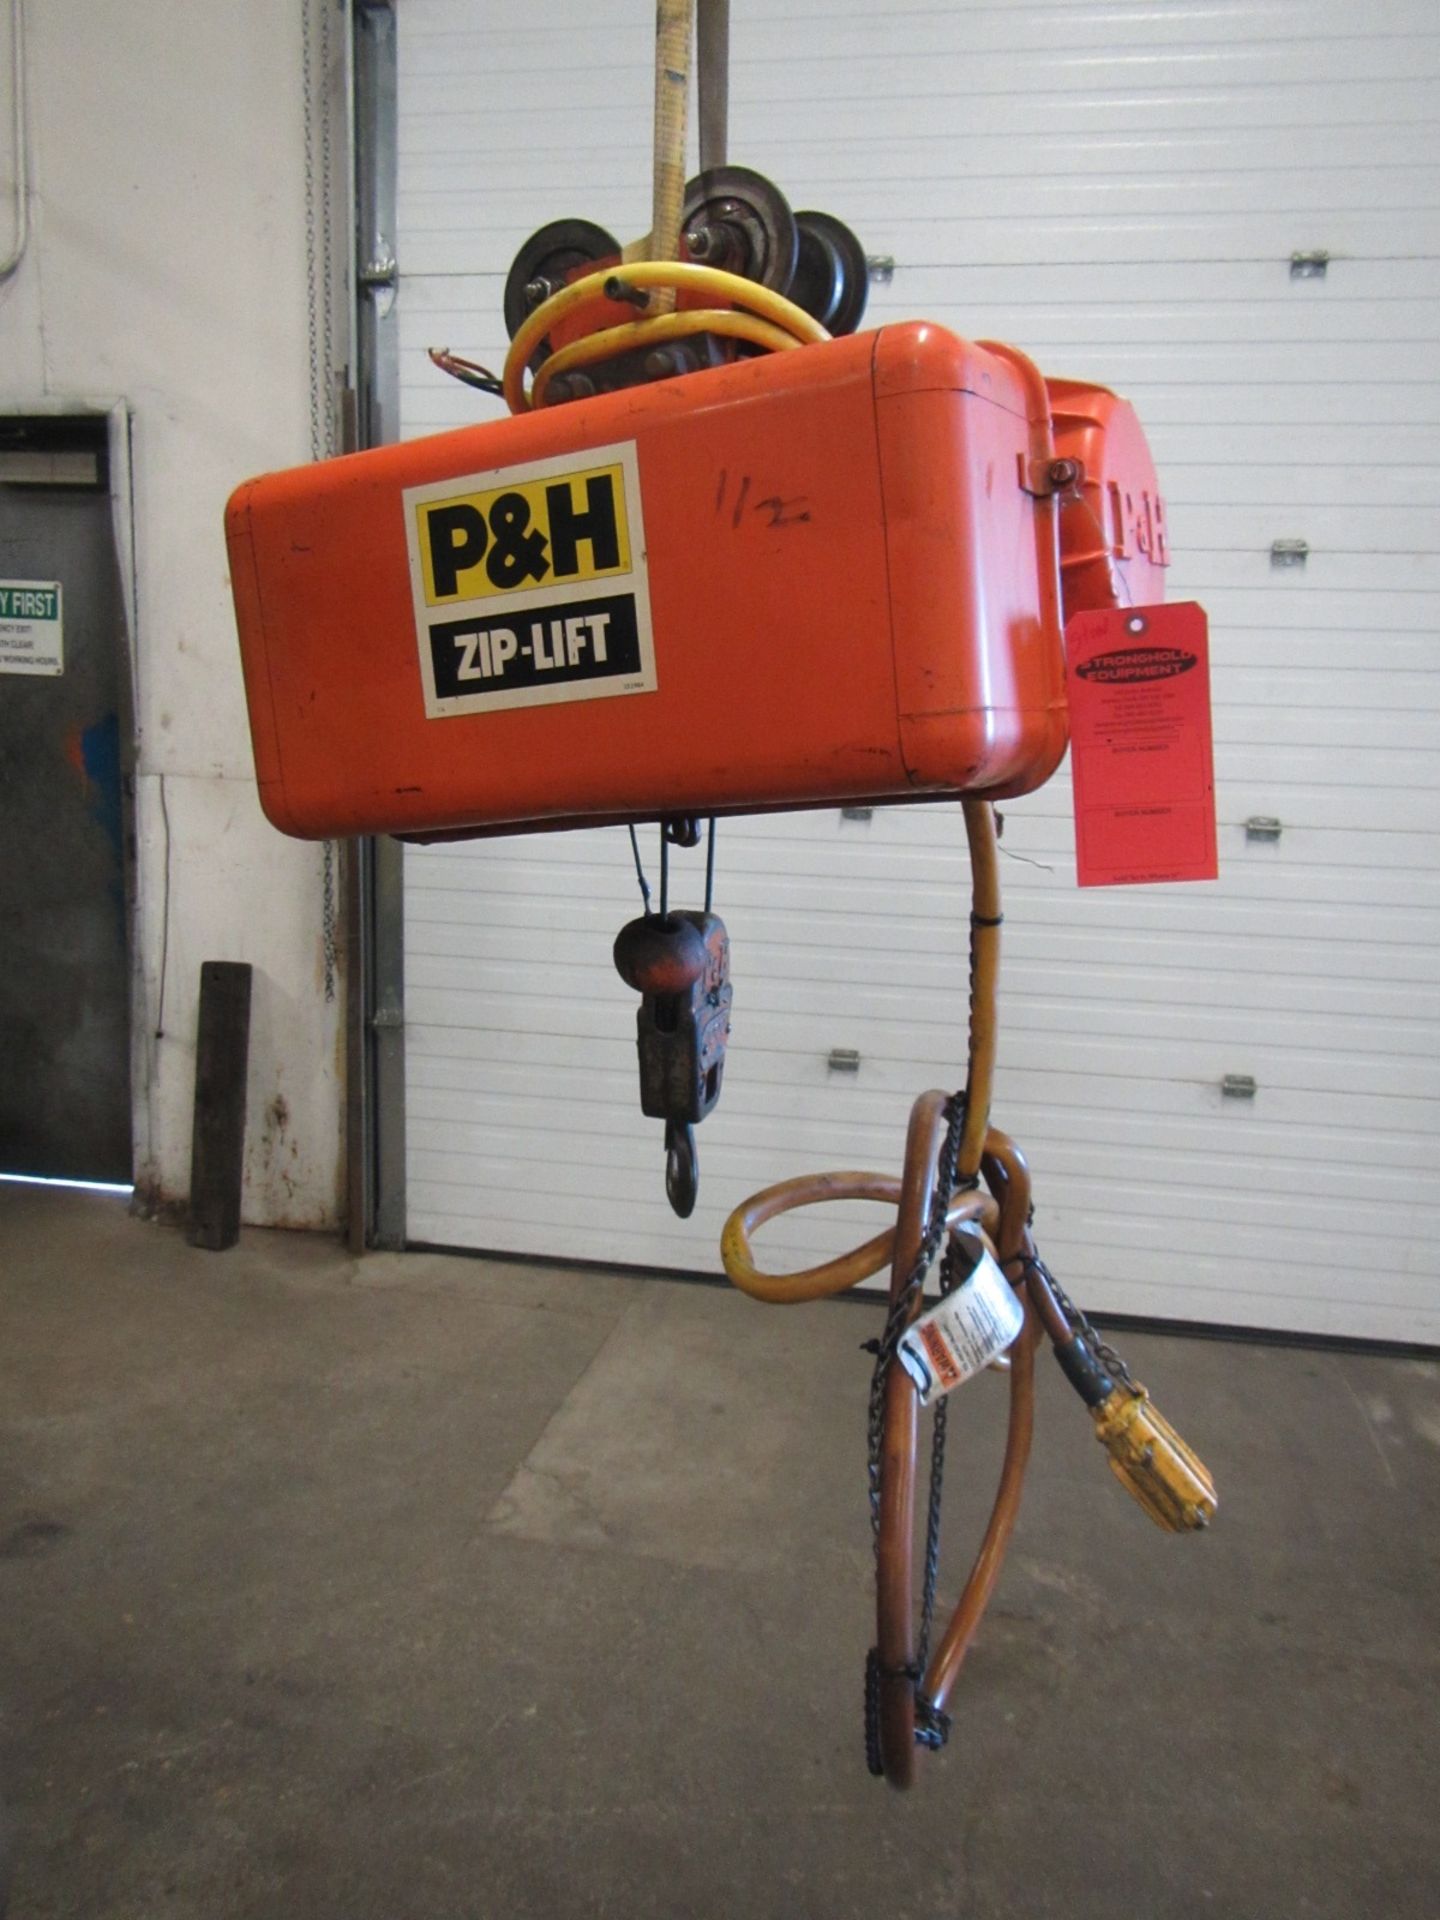 P&H ZIP-LIFT 1/2 Ton Electric Hoist - 2 speed and 15' of lift - pendant control - 3 phase with